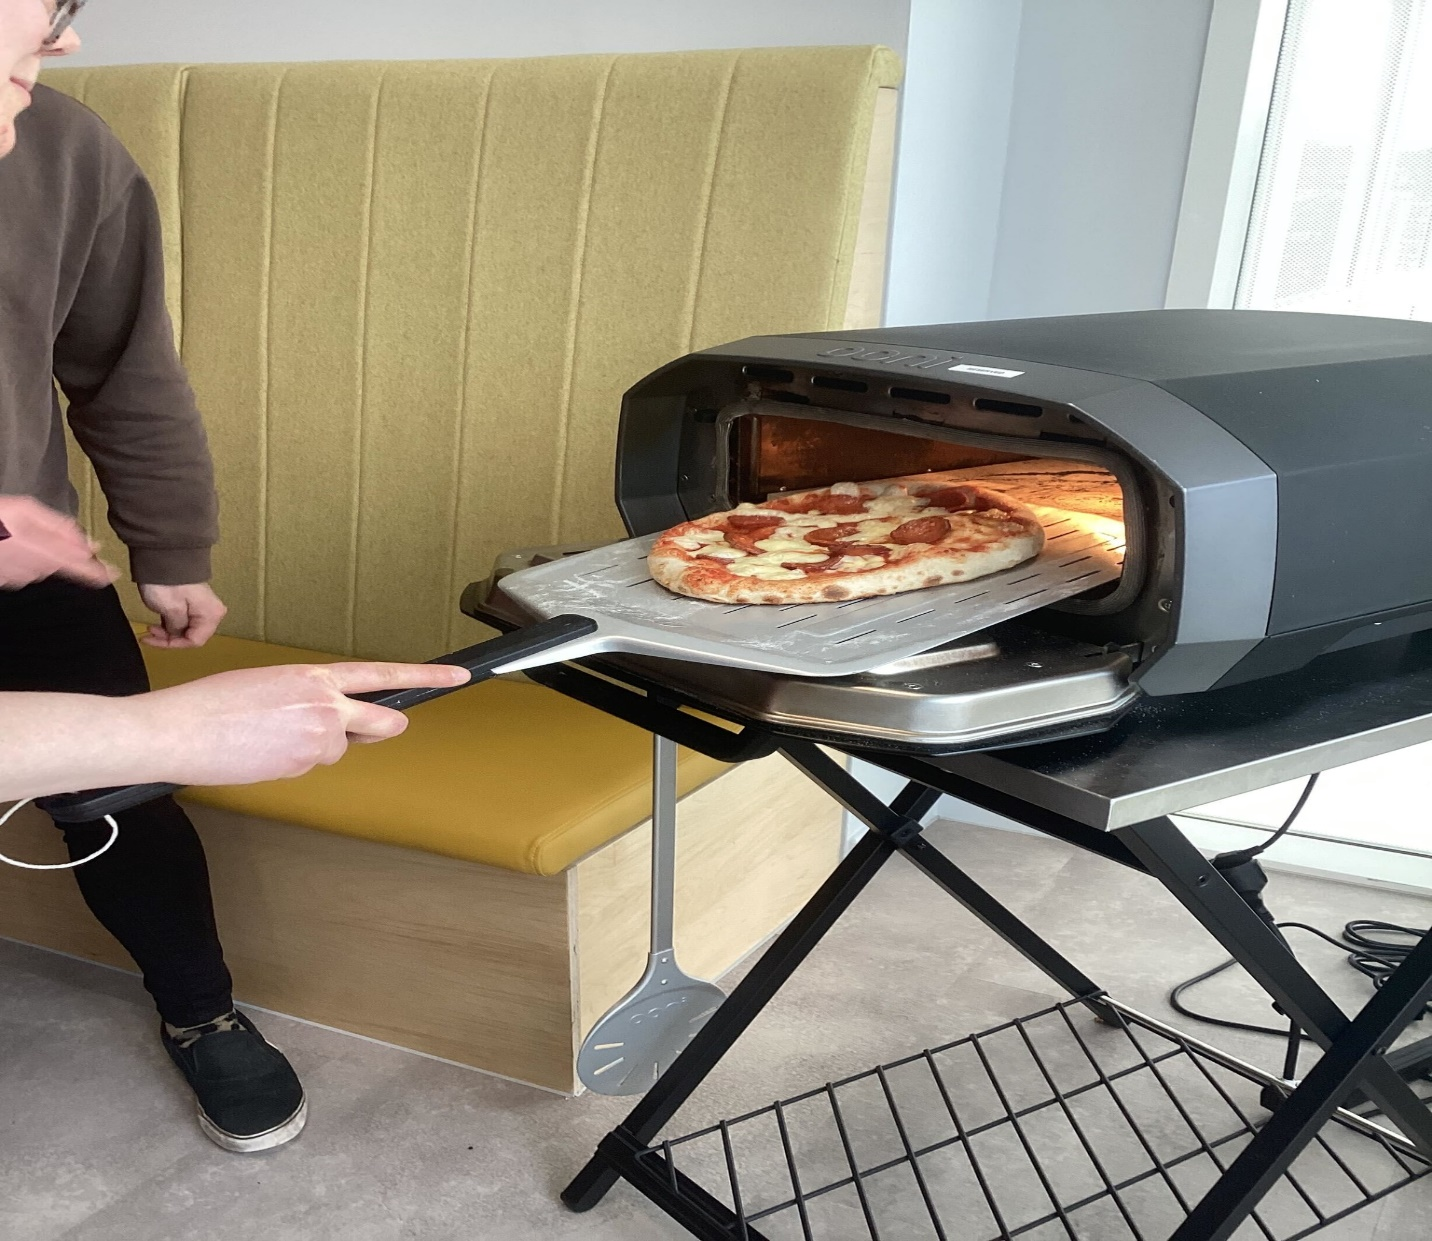 Is an Electric Pizza Oven Worth the Investment?